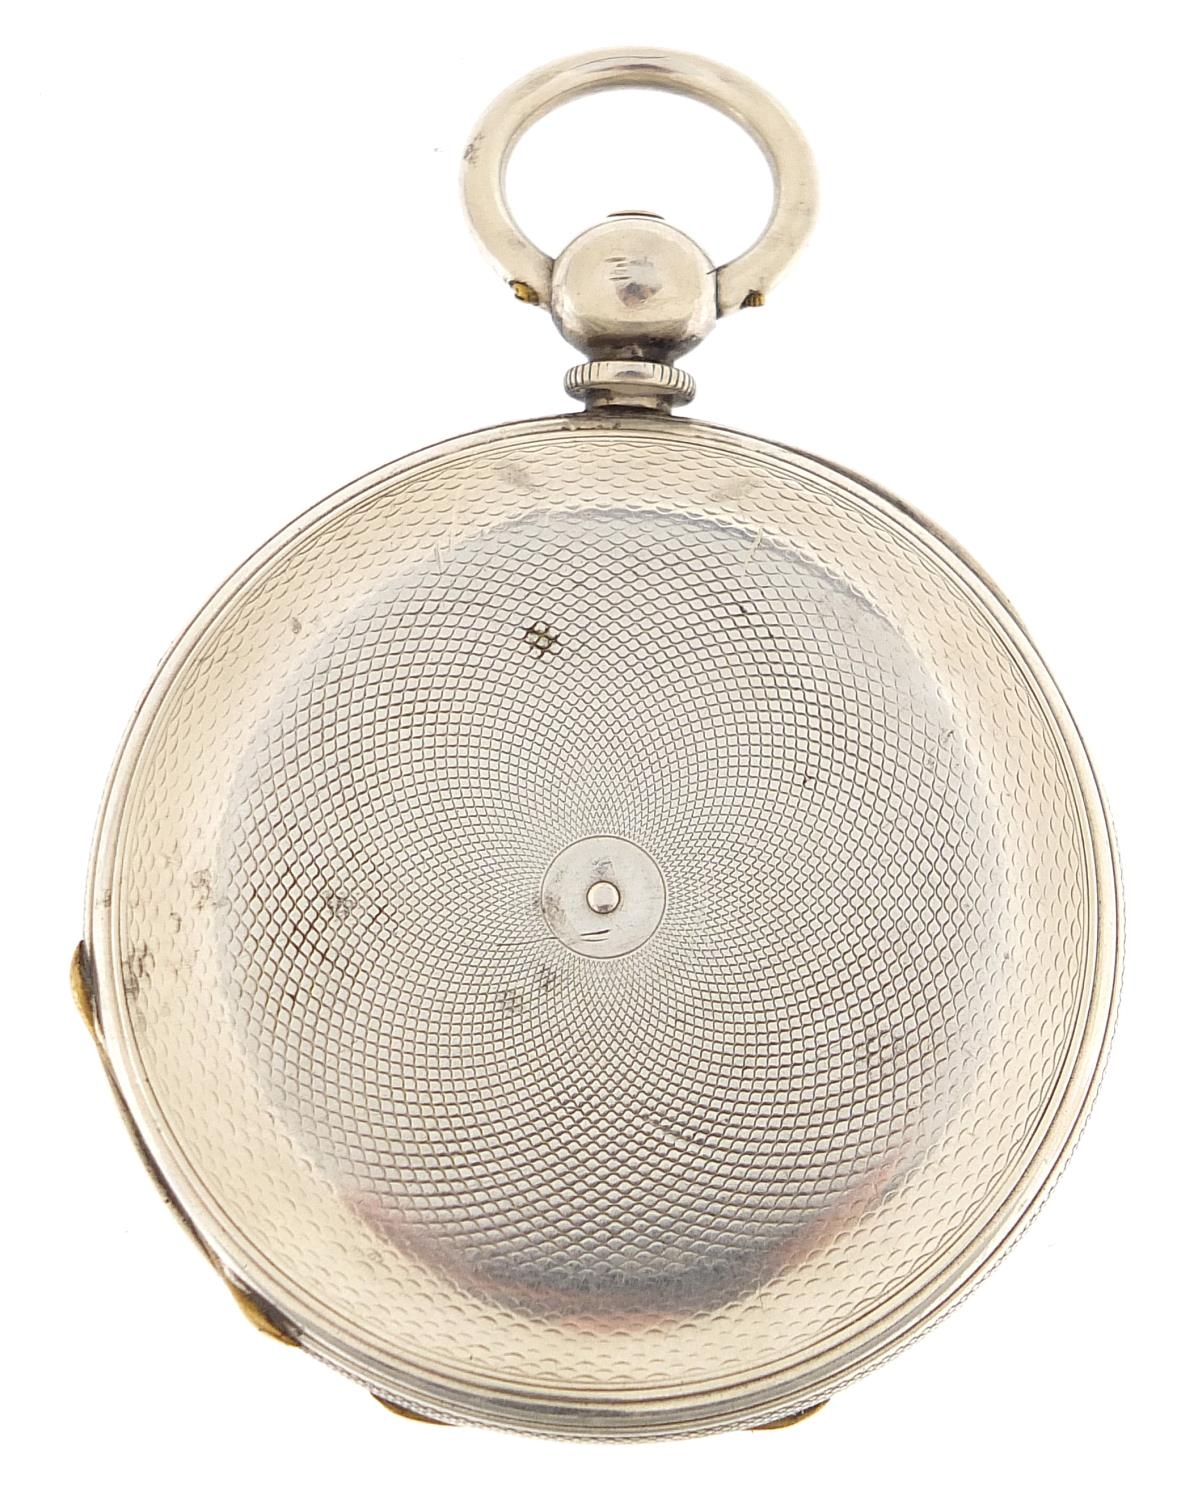 Gentlemen's silver full hunter pocket watch with ornate silvered and gilt dial, 50mm in diameter - Image 3 of 6